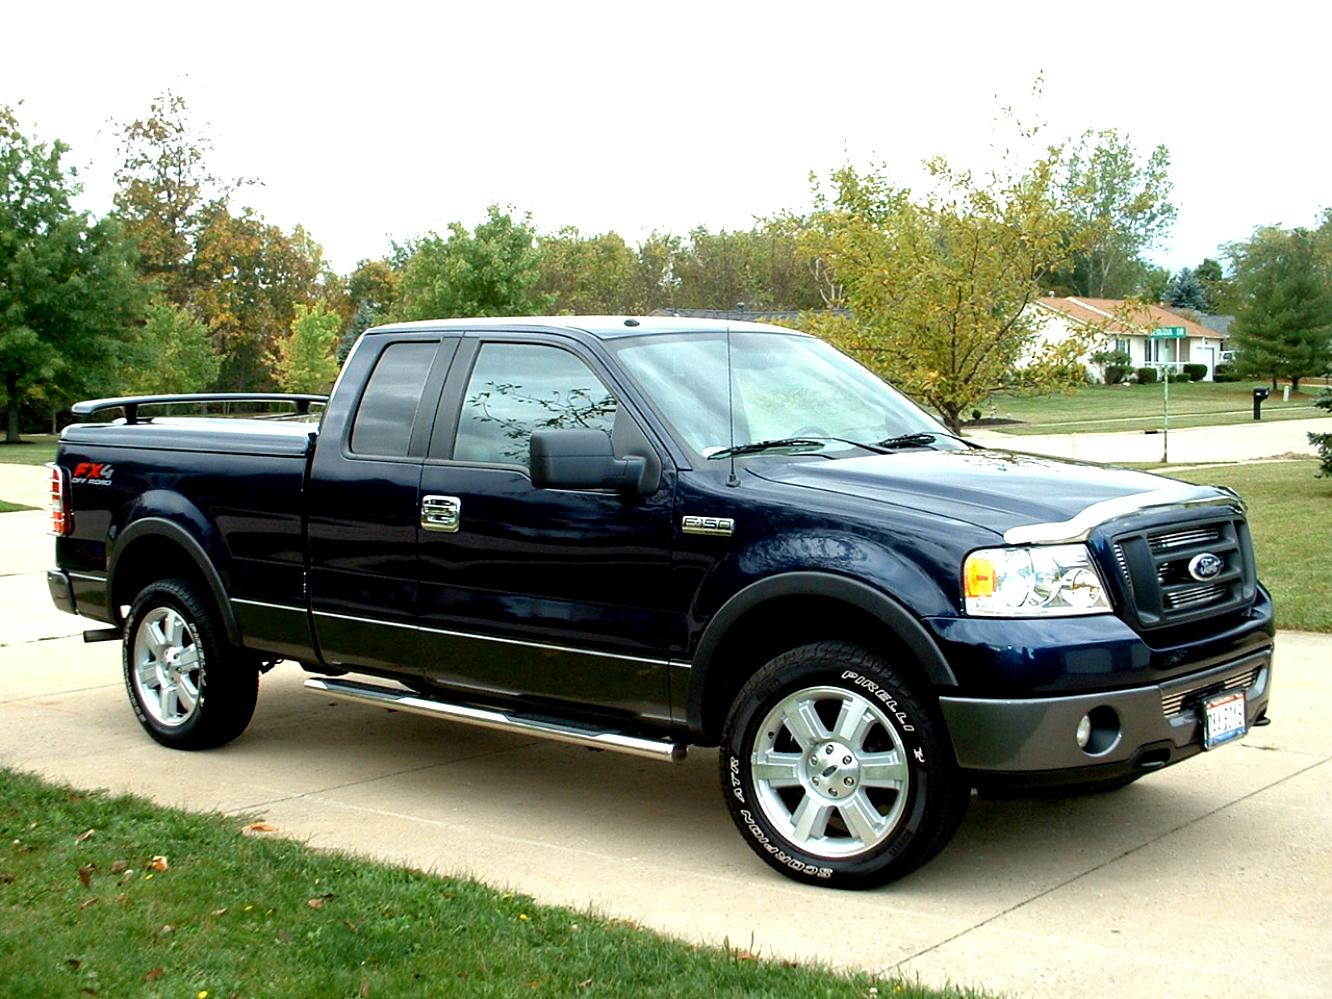 Пикап 2006. Форд ф150 2006. Ford 150 2006. Ford f150. Ford f 150 5.4.